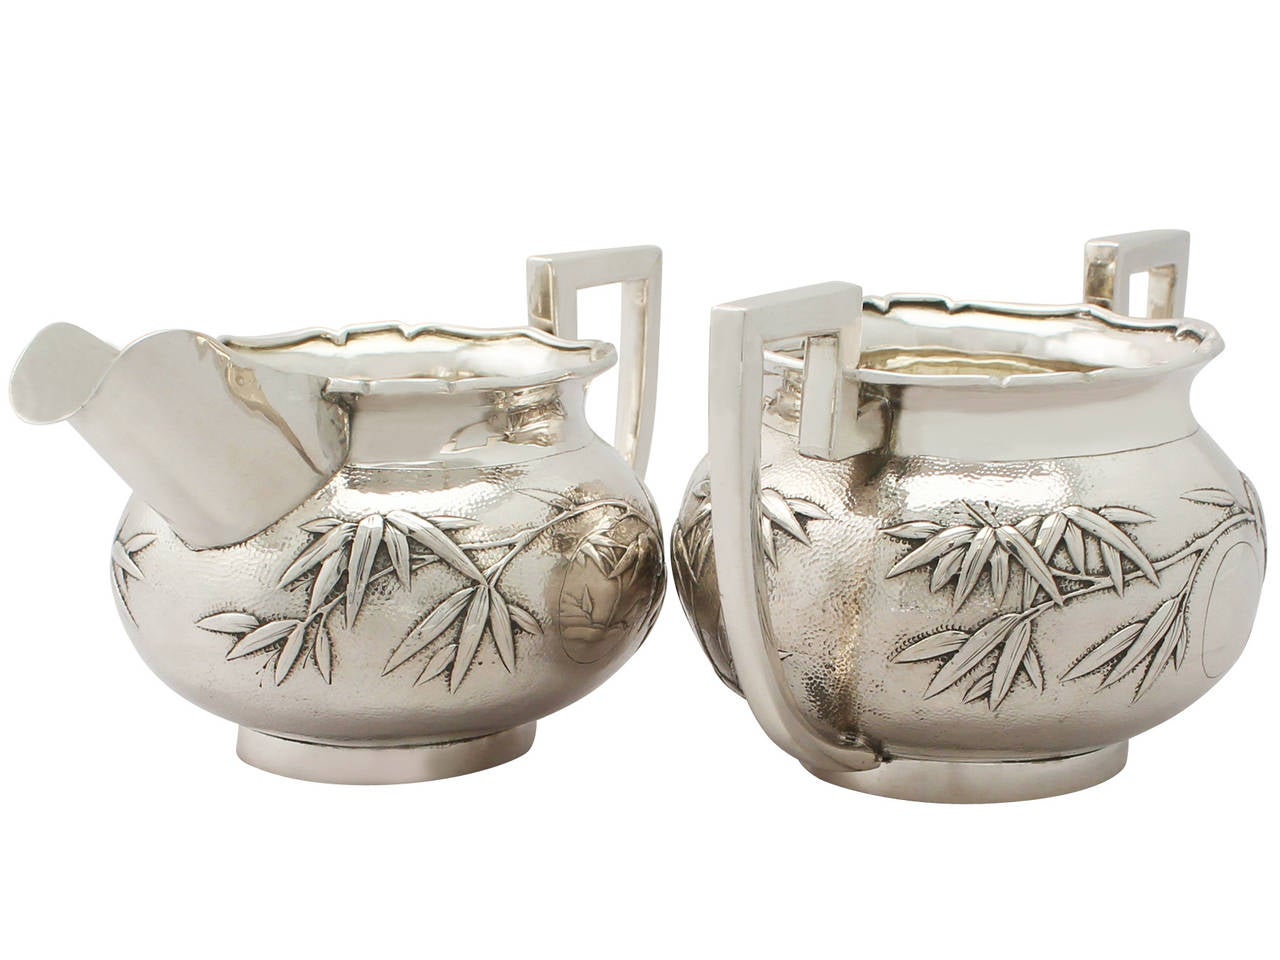 1900s Chinese Export Silver Cream Jug / Creamer and Sugar Bowl In Excellent Condition For Sale In Jesmond, Newcastle Upon Tyne